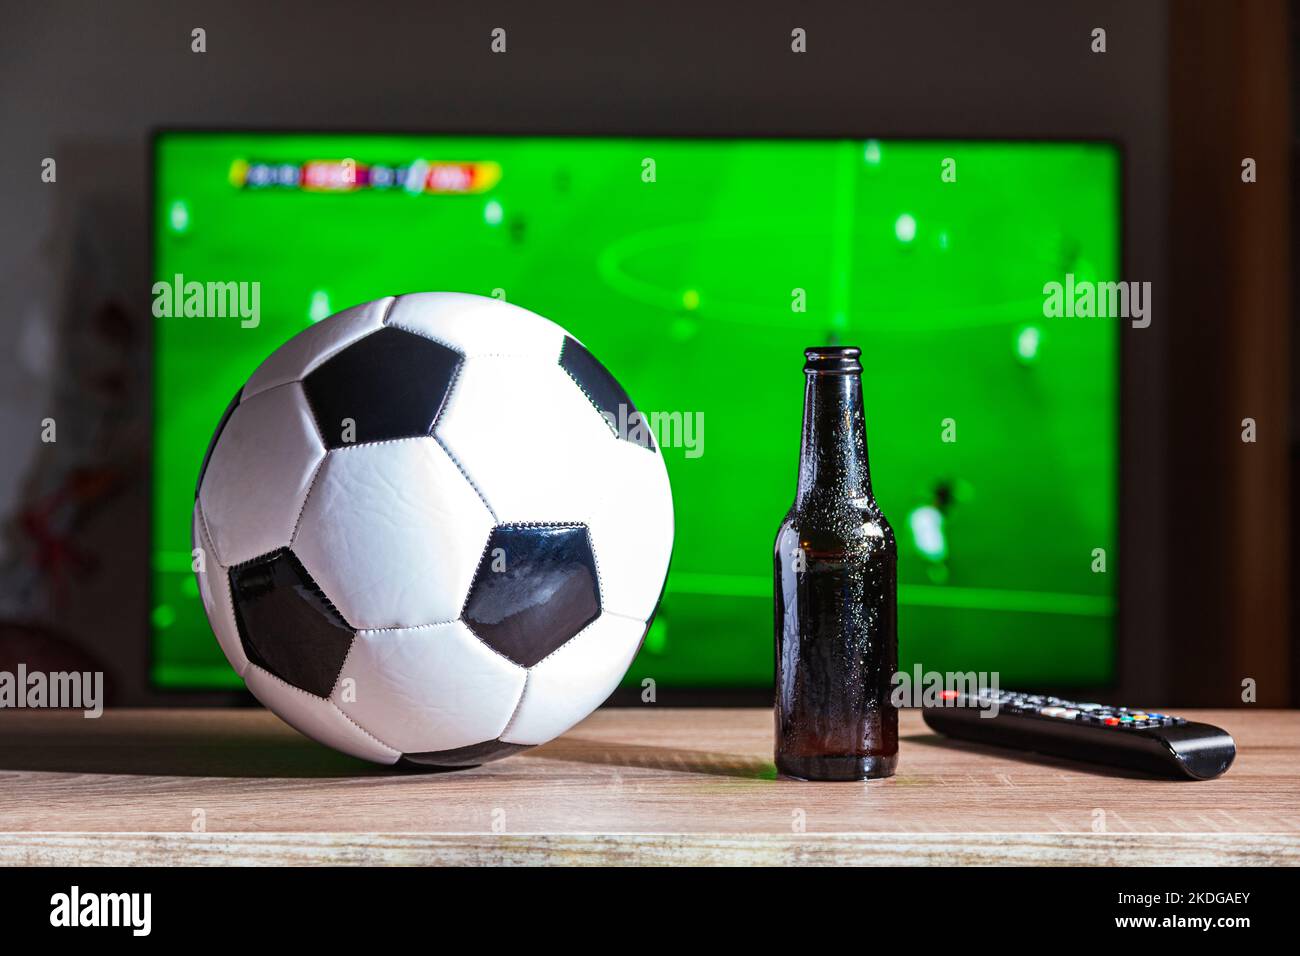 On a table is a soccer ball, a bottle of beer and a remote control. In the background, out of focus, there is a television set on which a football gam Stock Photo